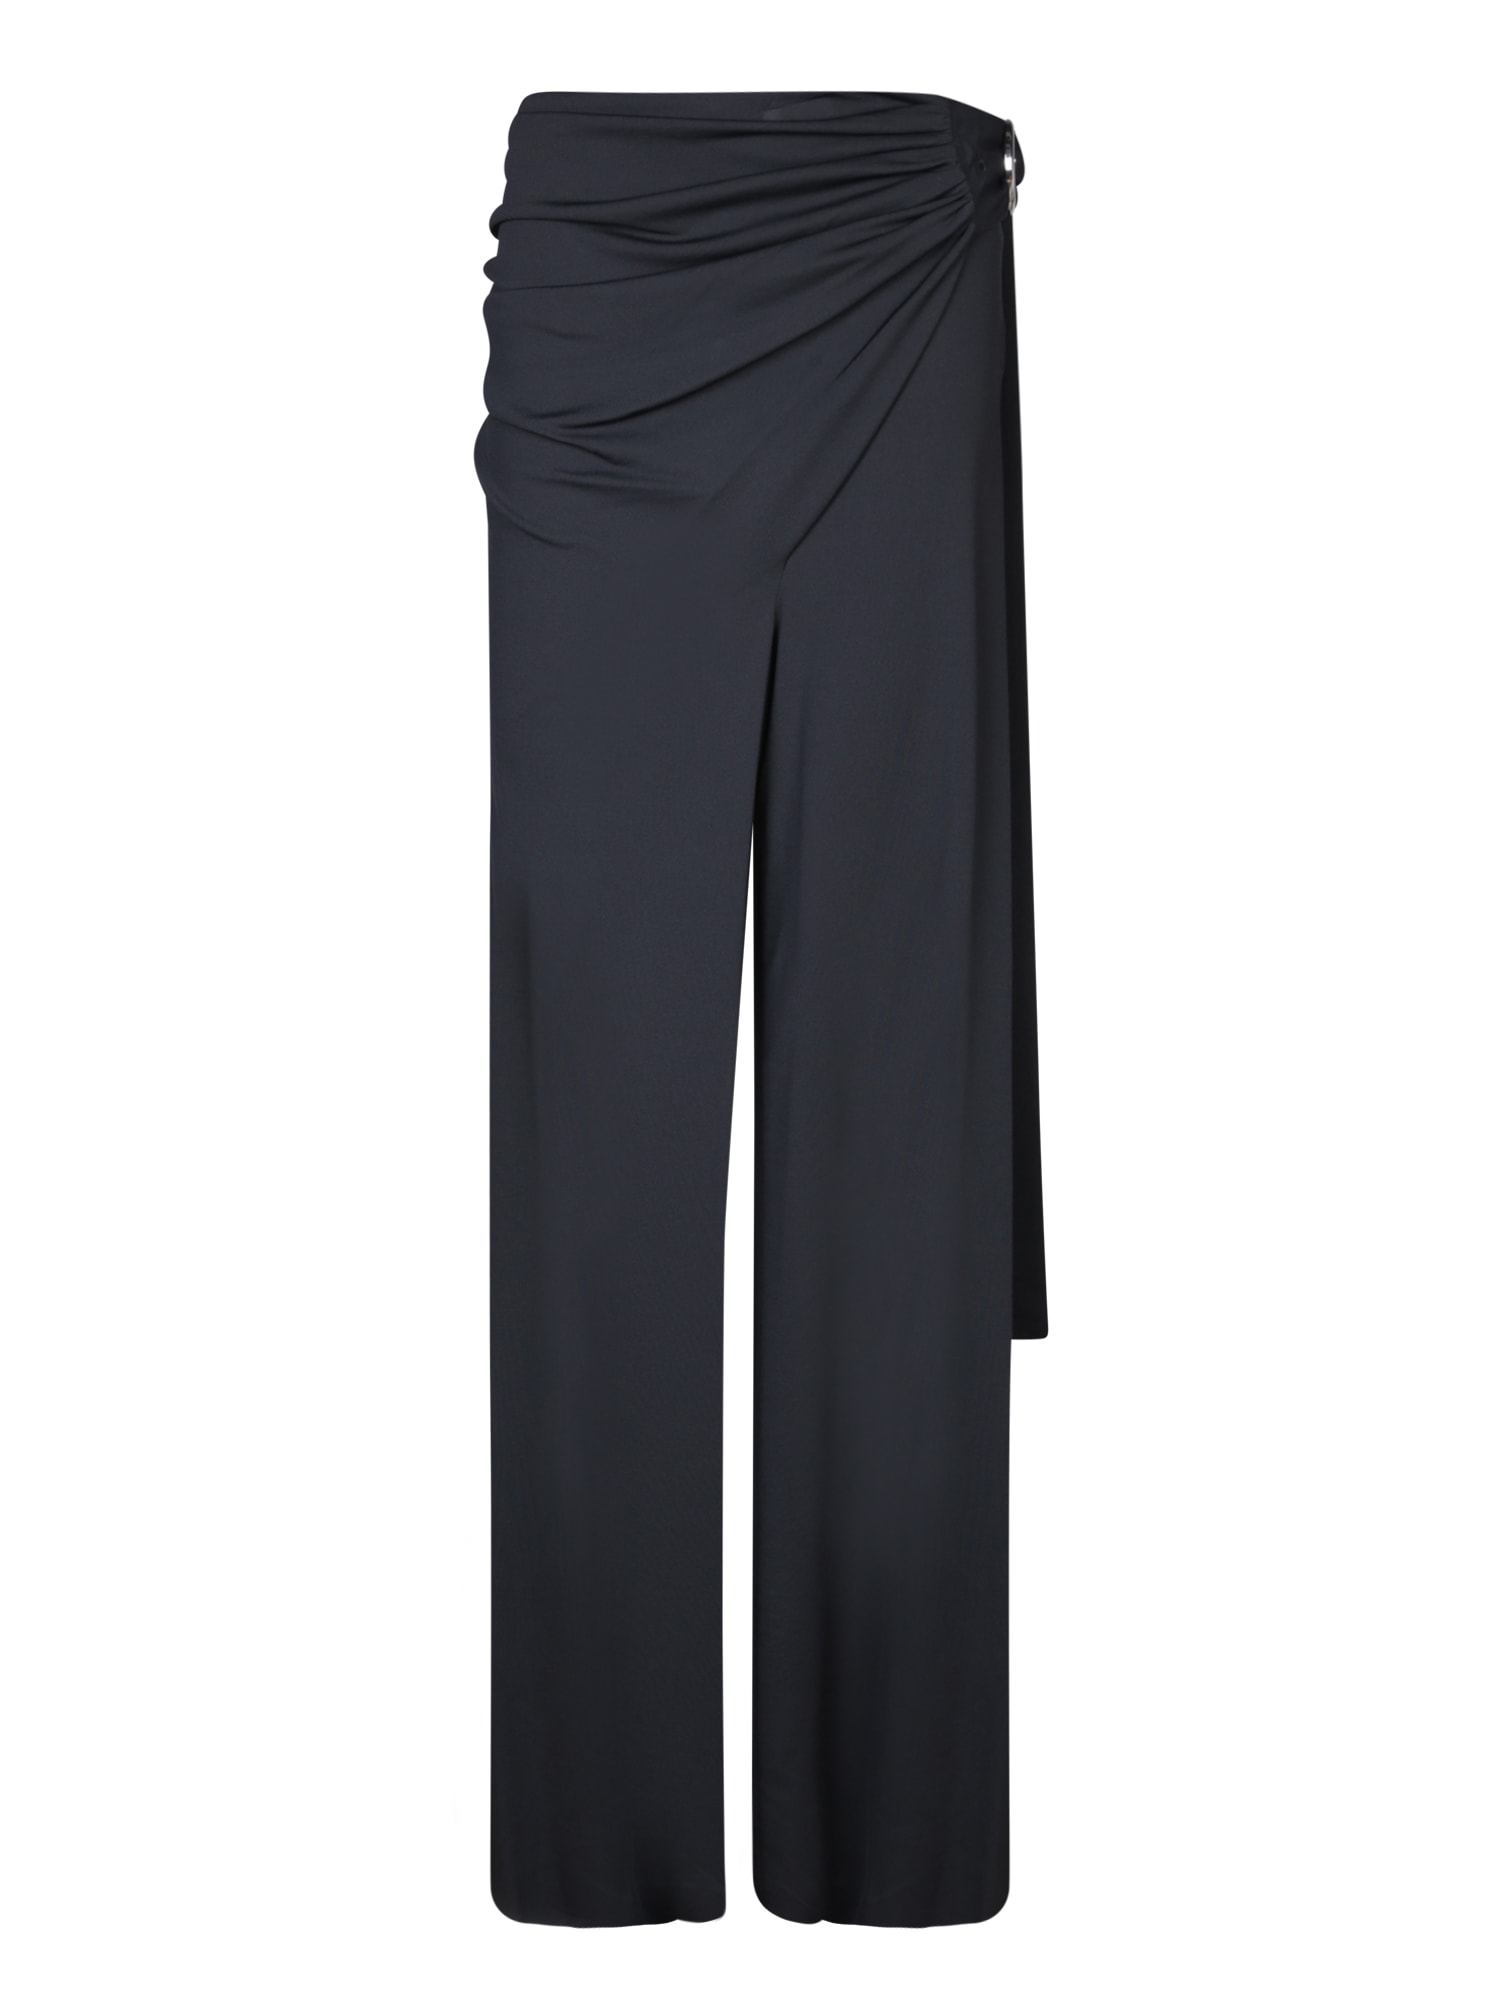 Black Jersey Knotted Trousers - Paco Rabanne